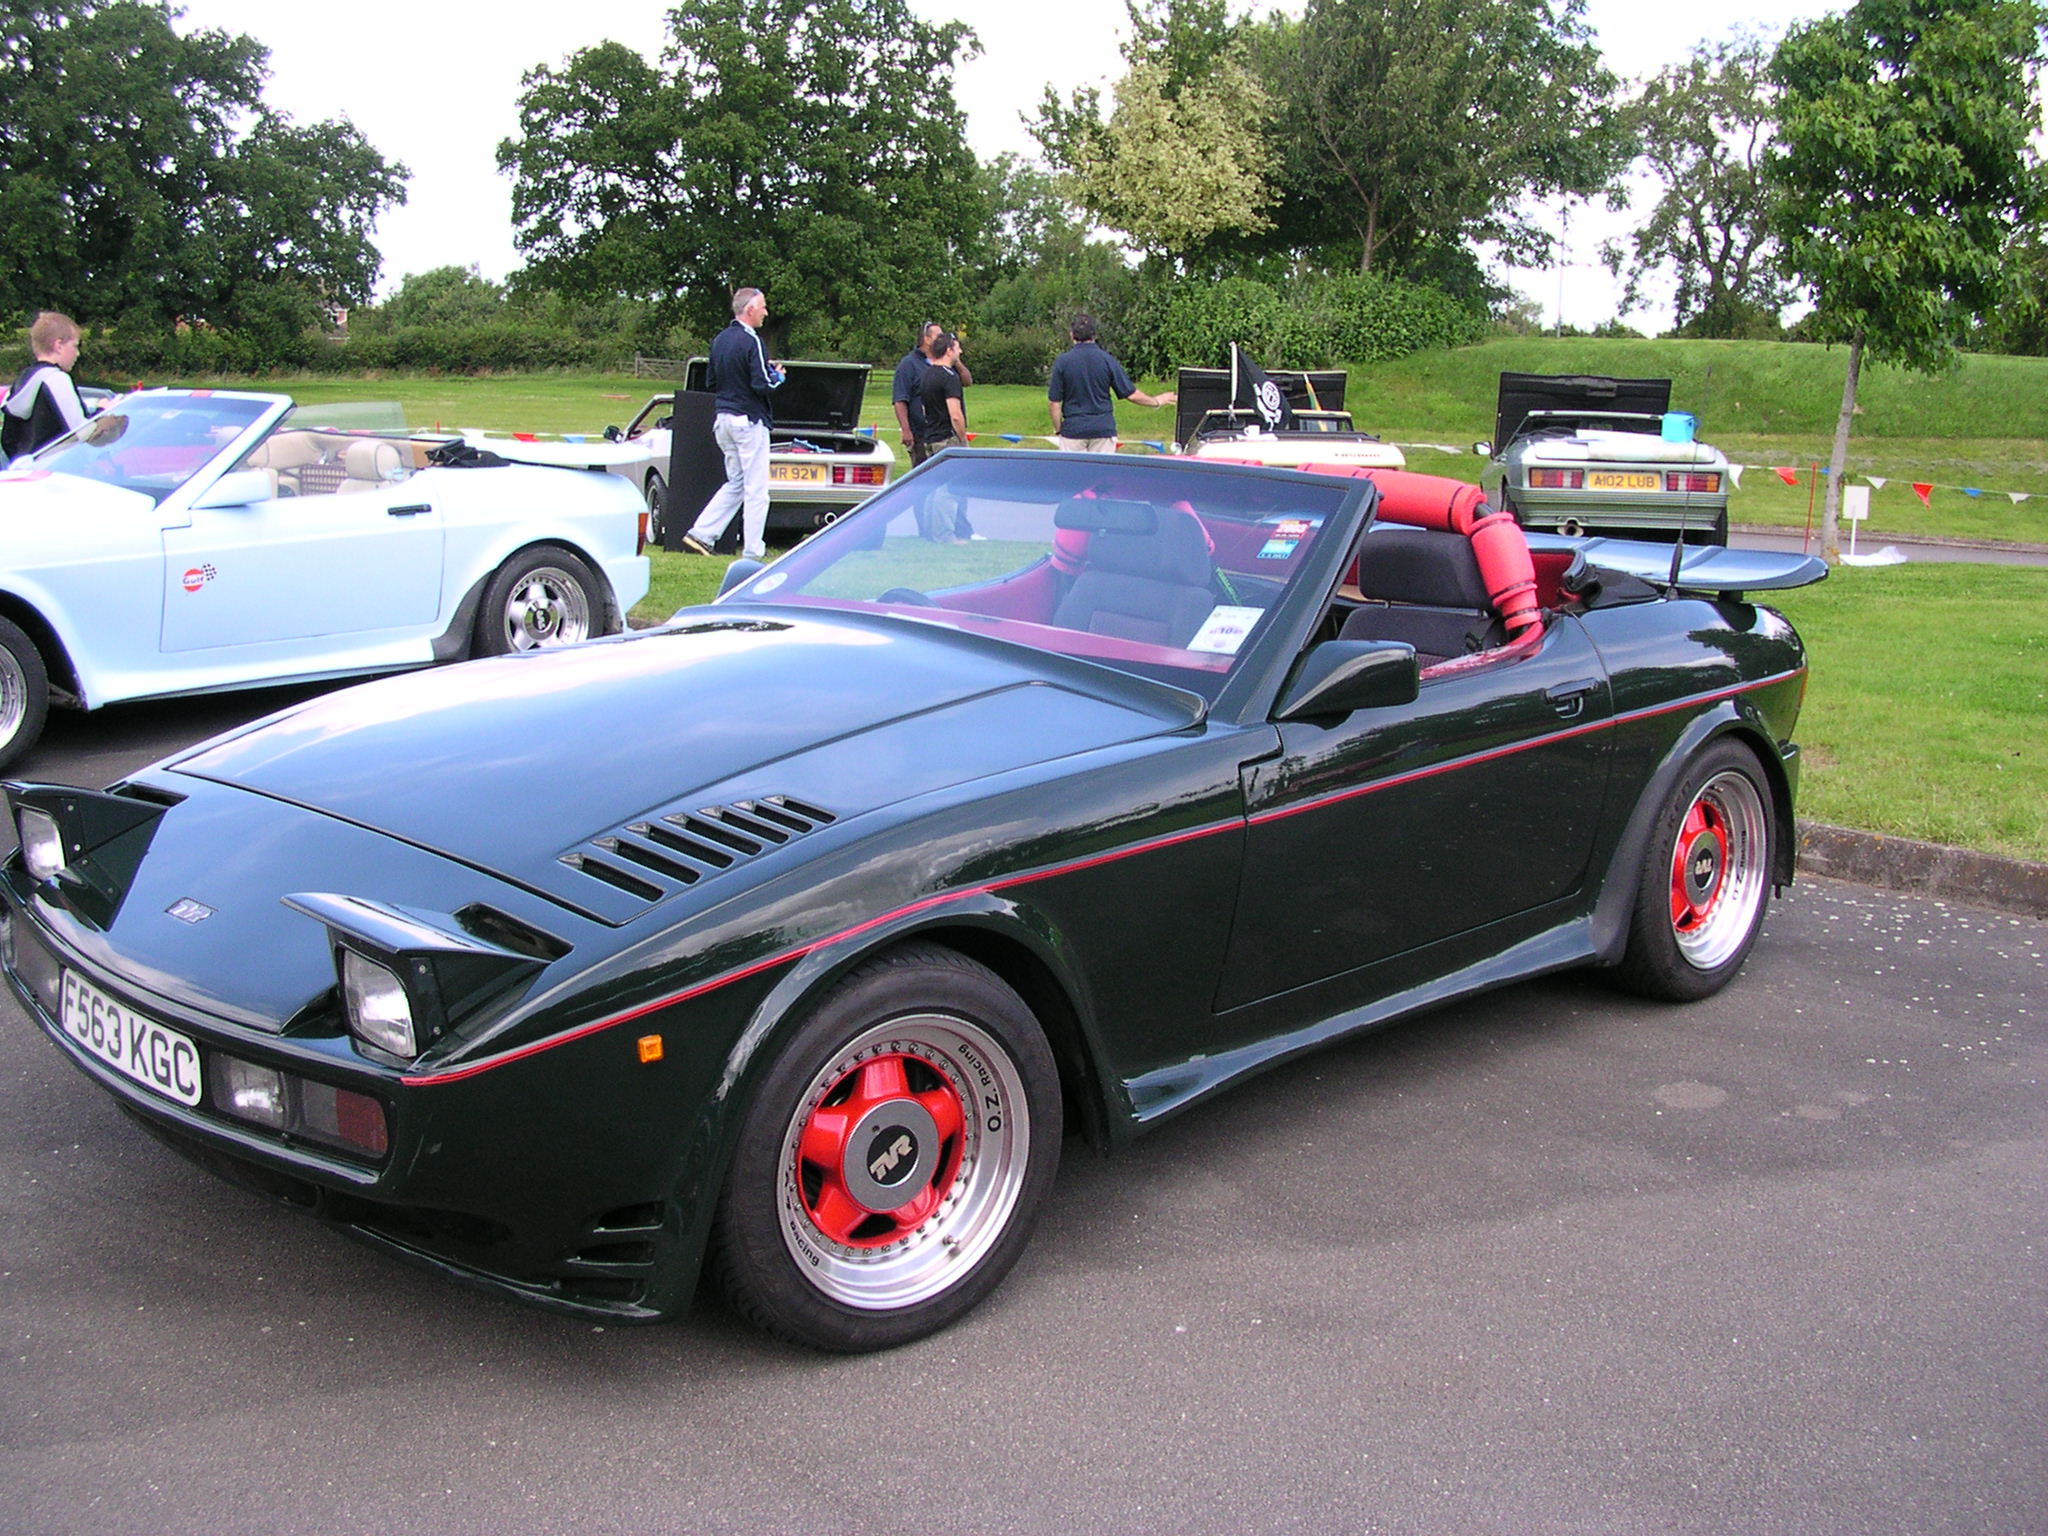 TVR 450